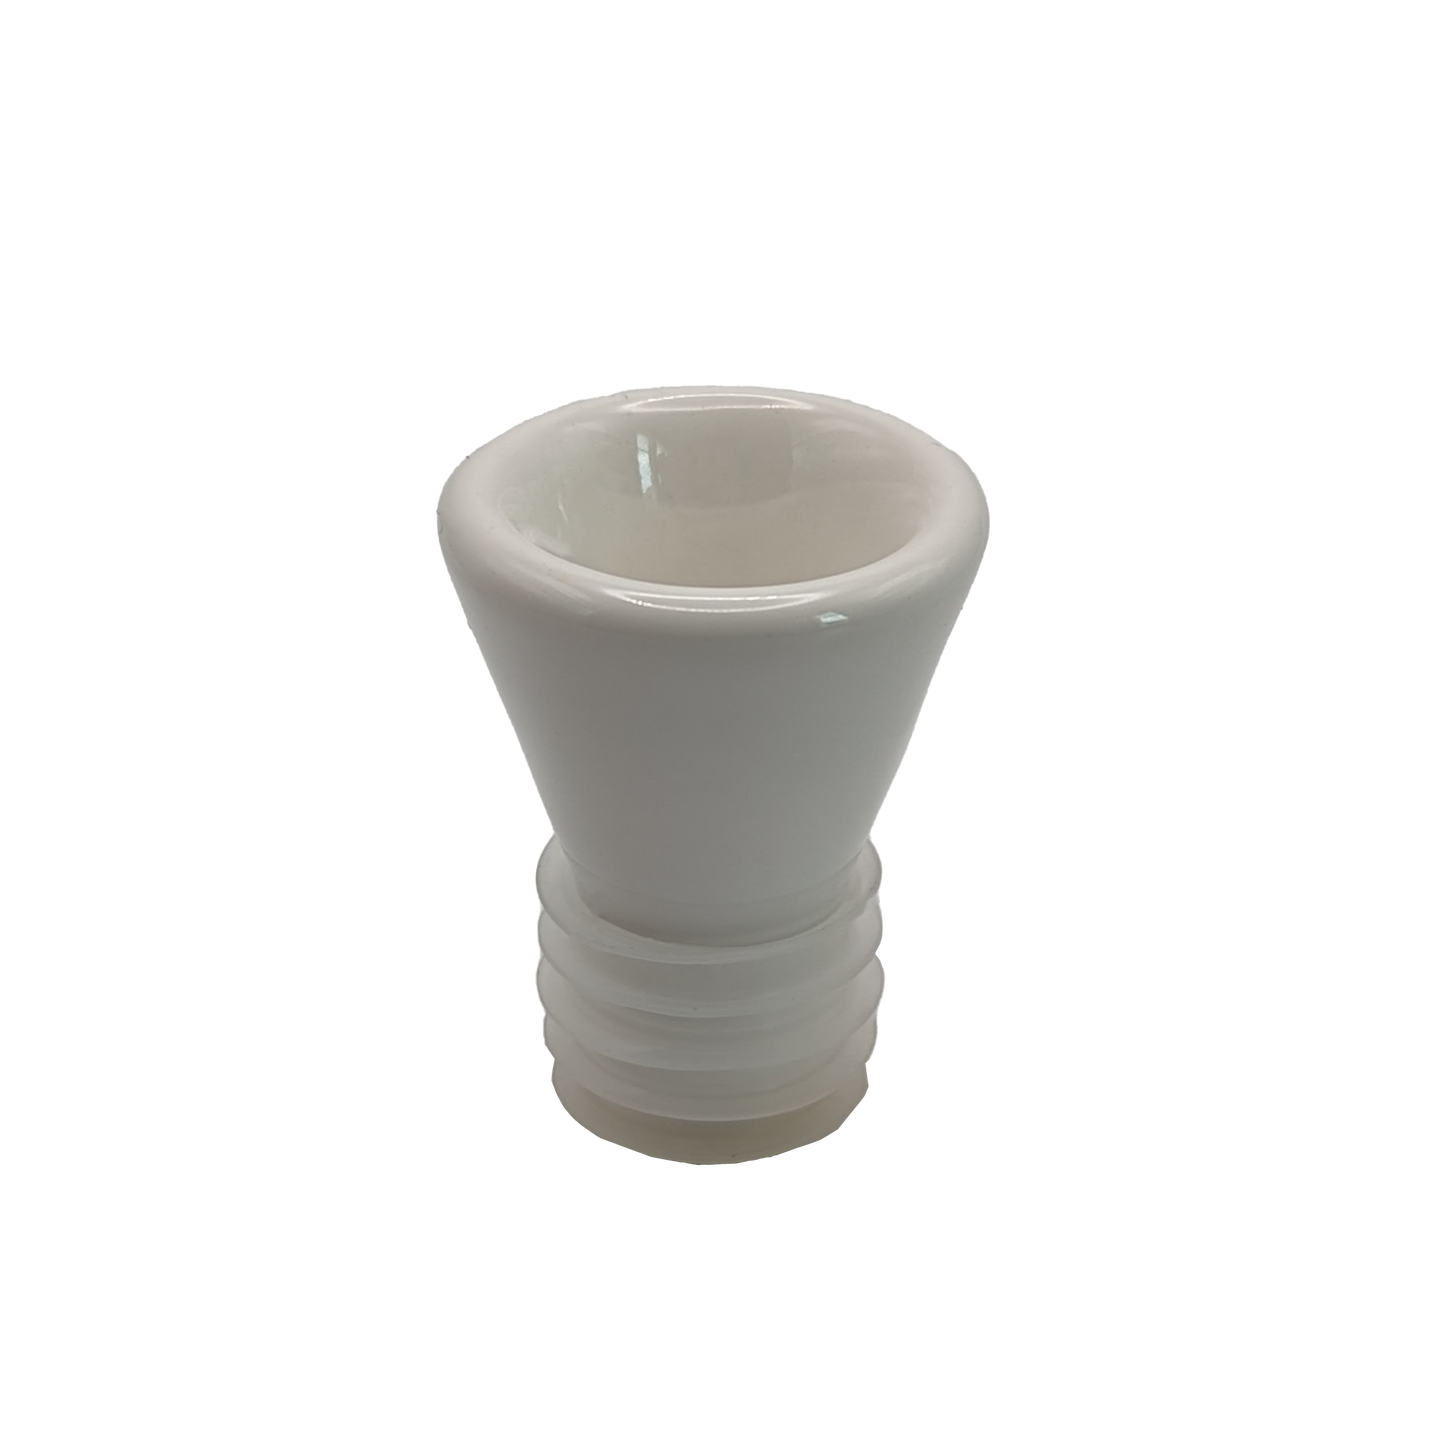 BRNT POLYGON BOWL - CERAMIC BOWL FOR WATER PIPES